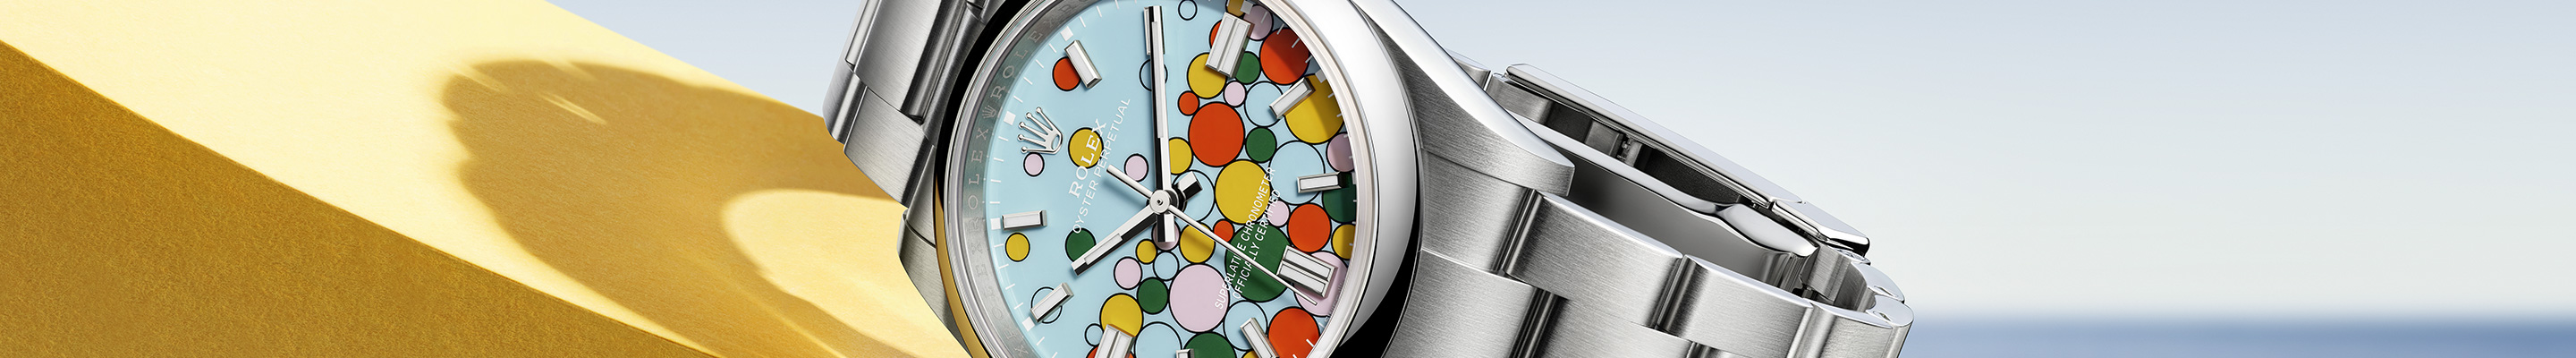 ROLEX OYSTER Perpetual Watch Banner image